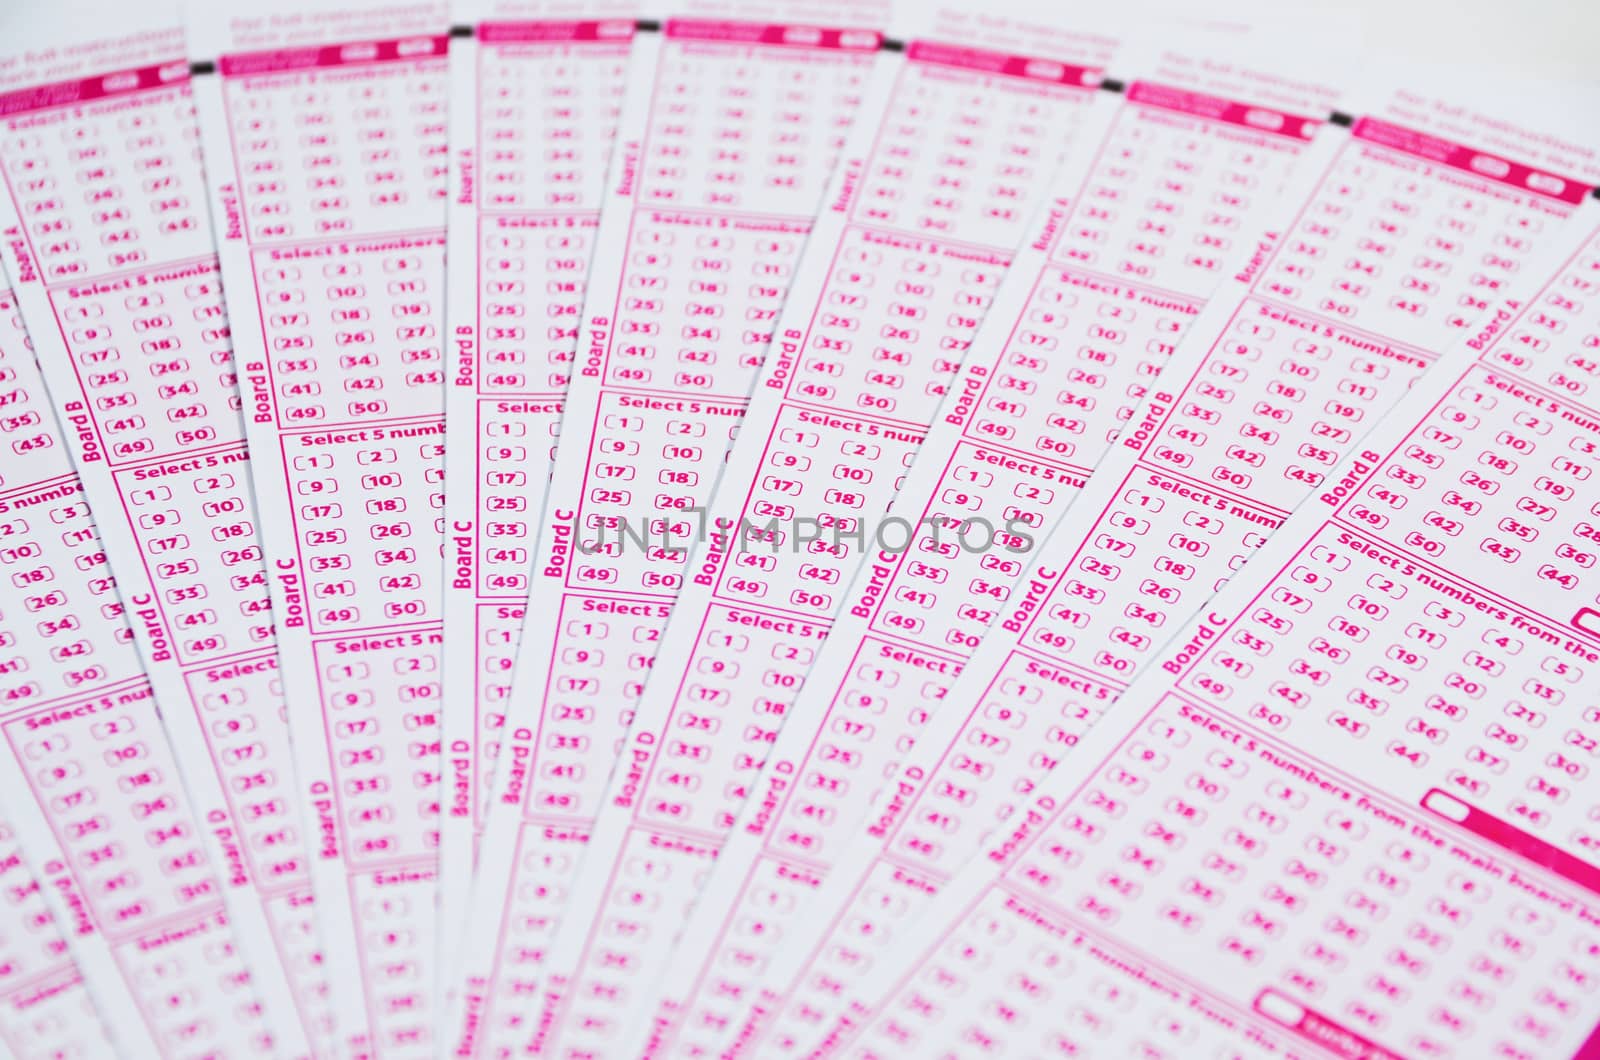 Blank lotto tickets scattered on white background

